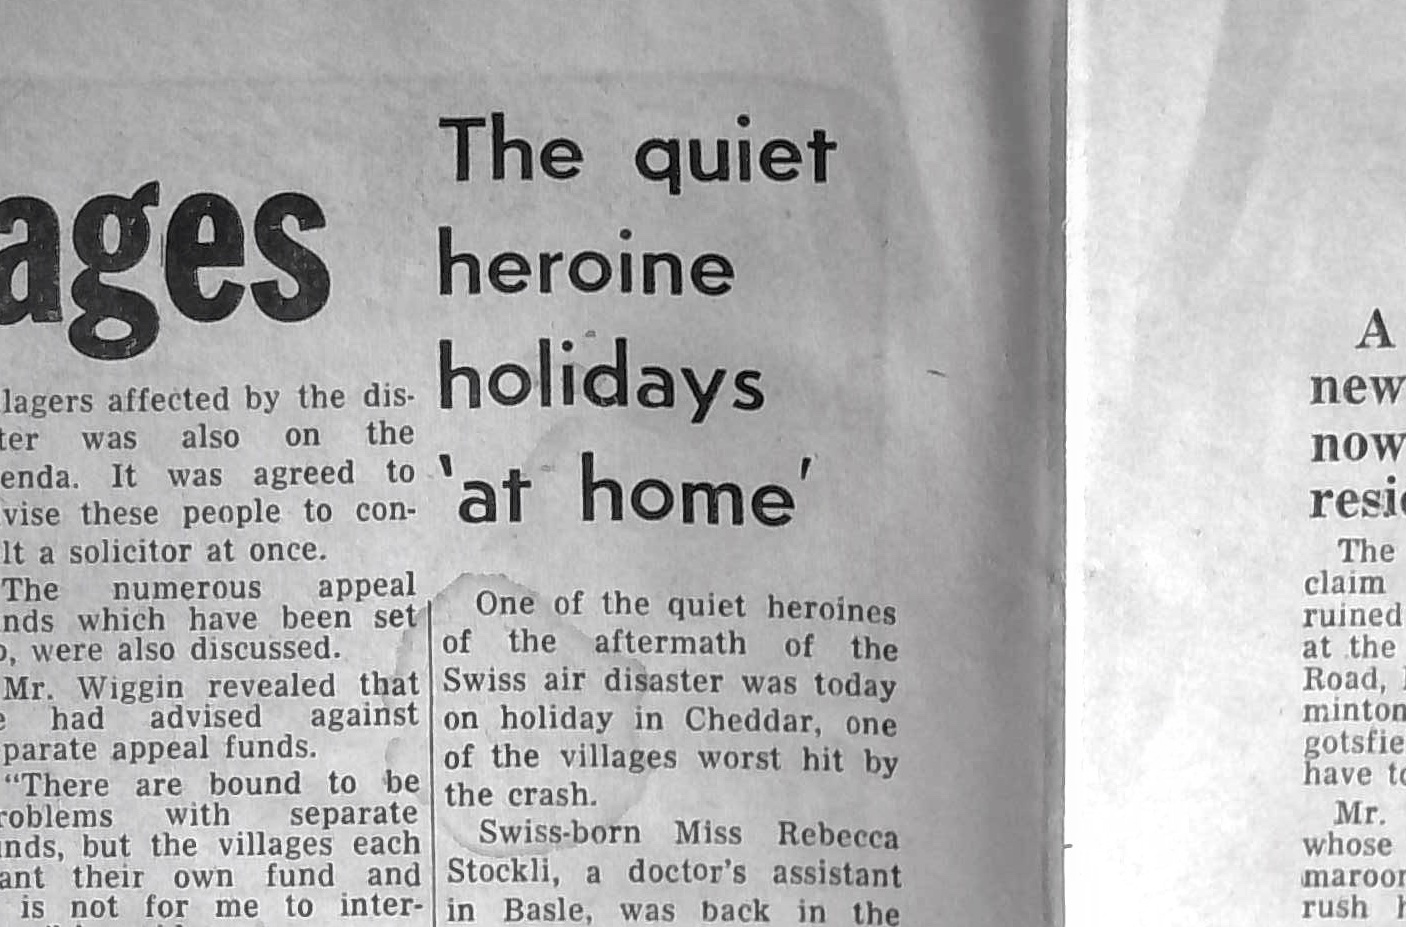 The quiet heroine holidays ‘at home’ 